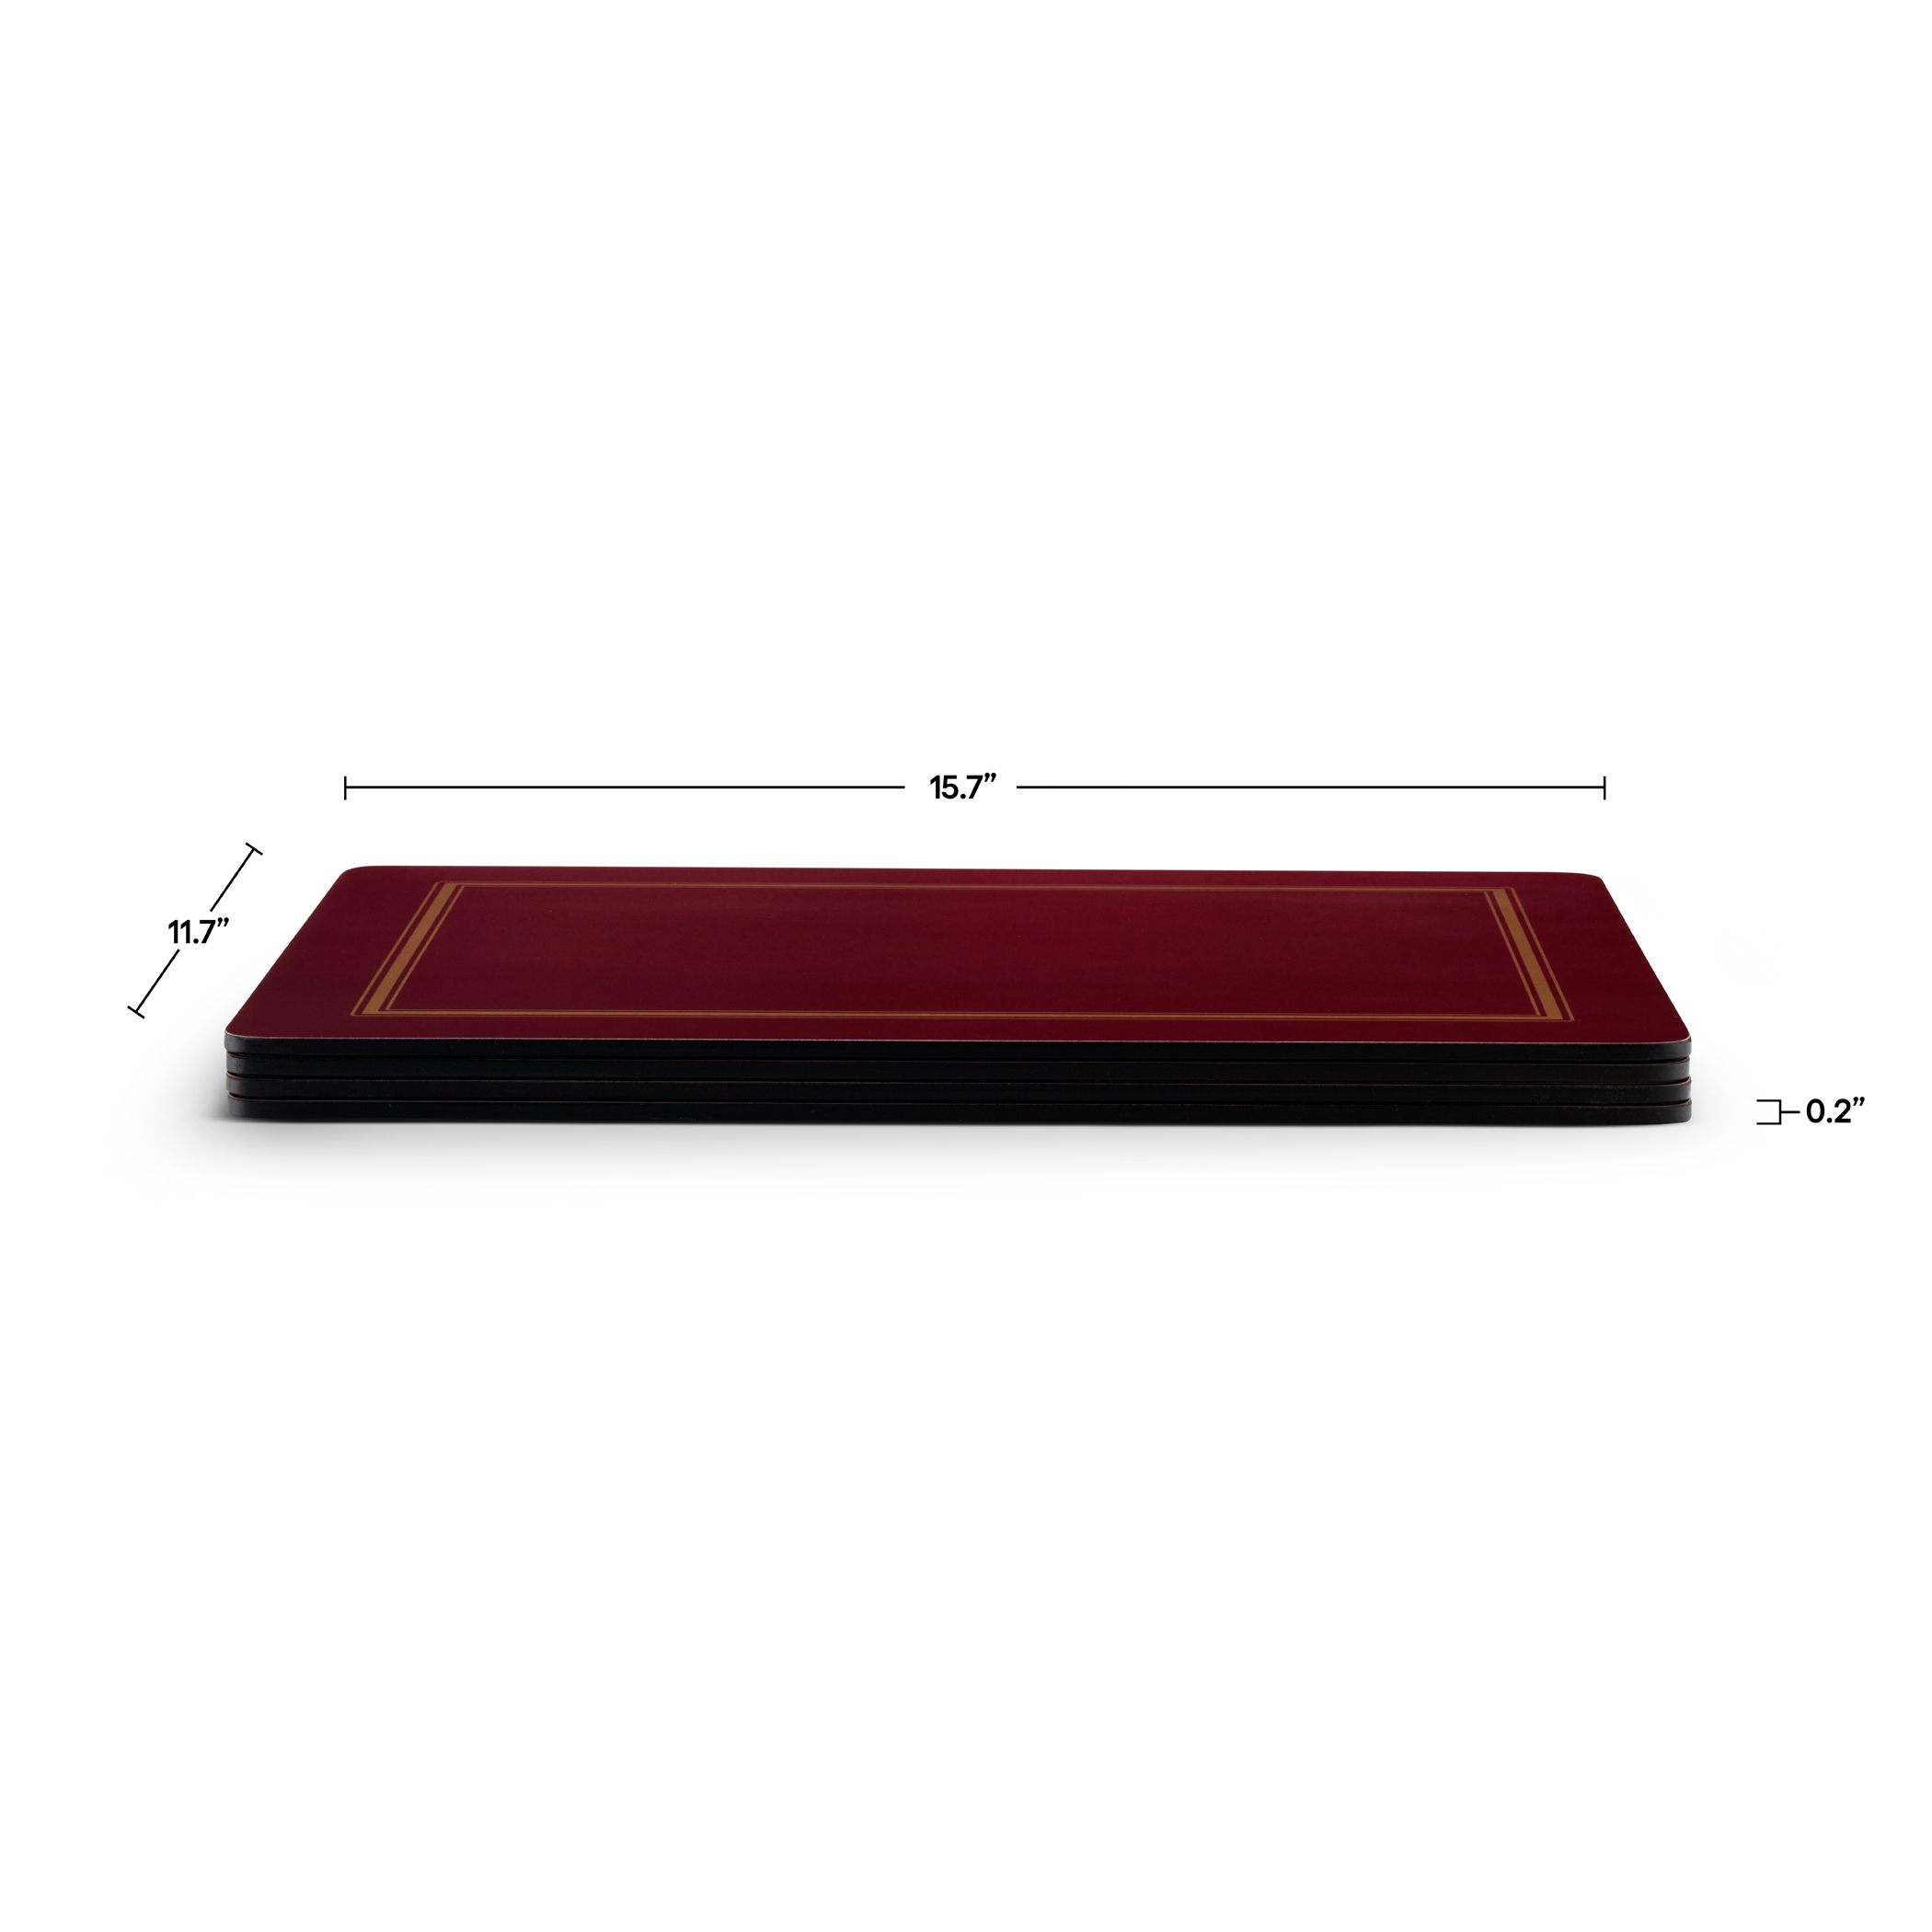 2010648043 Pimpernel Placemats Classic Burgundy Set of 4 